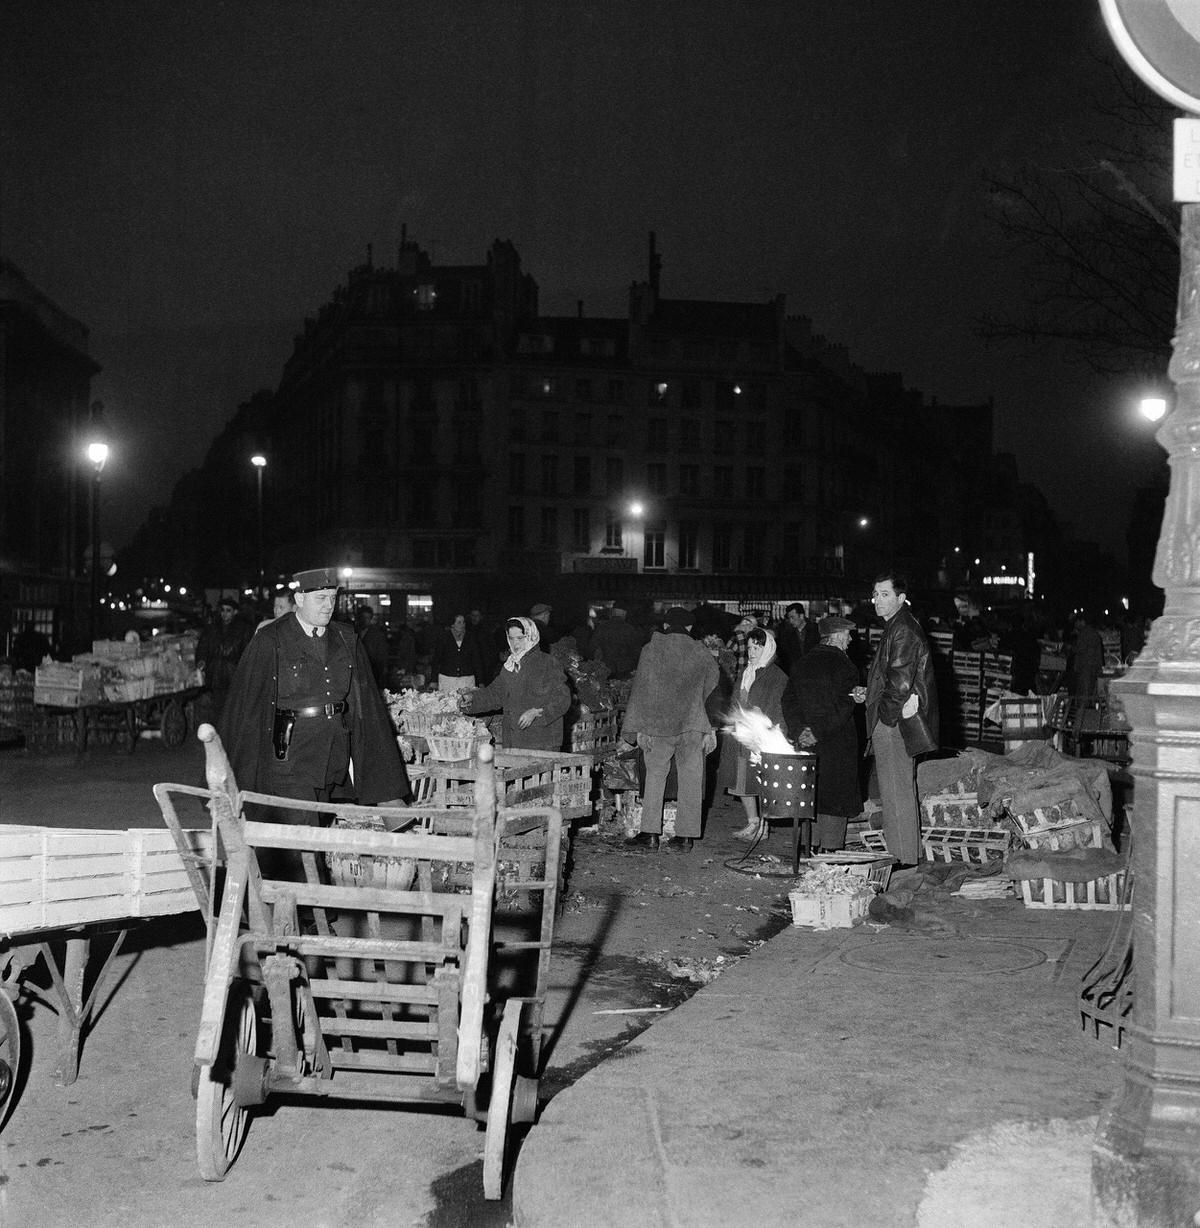 Market of Les Halles in Paris, on February 22, 1962.